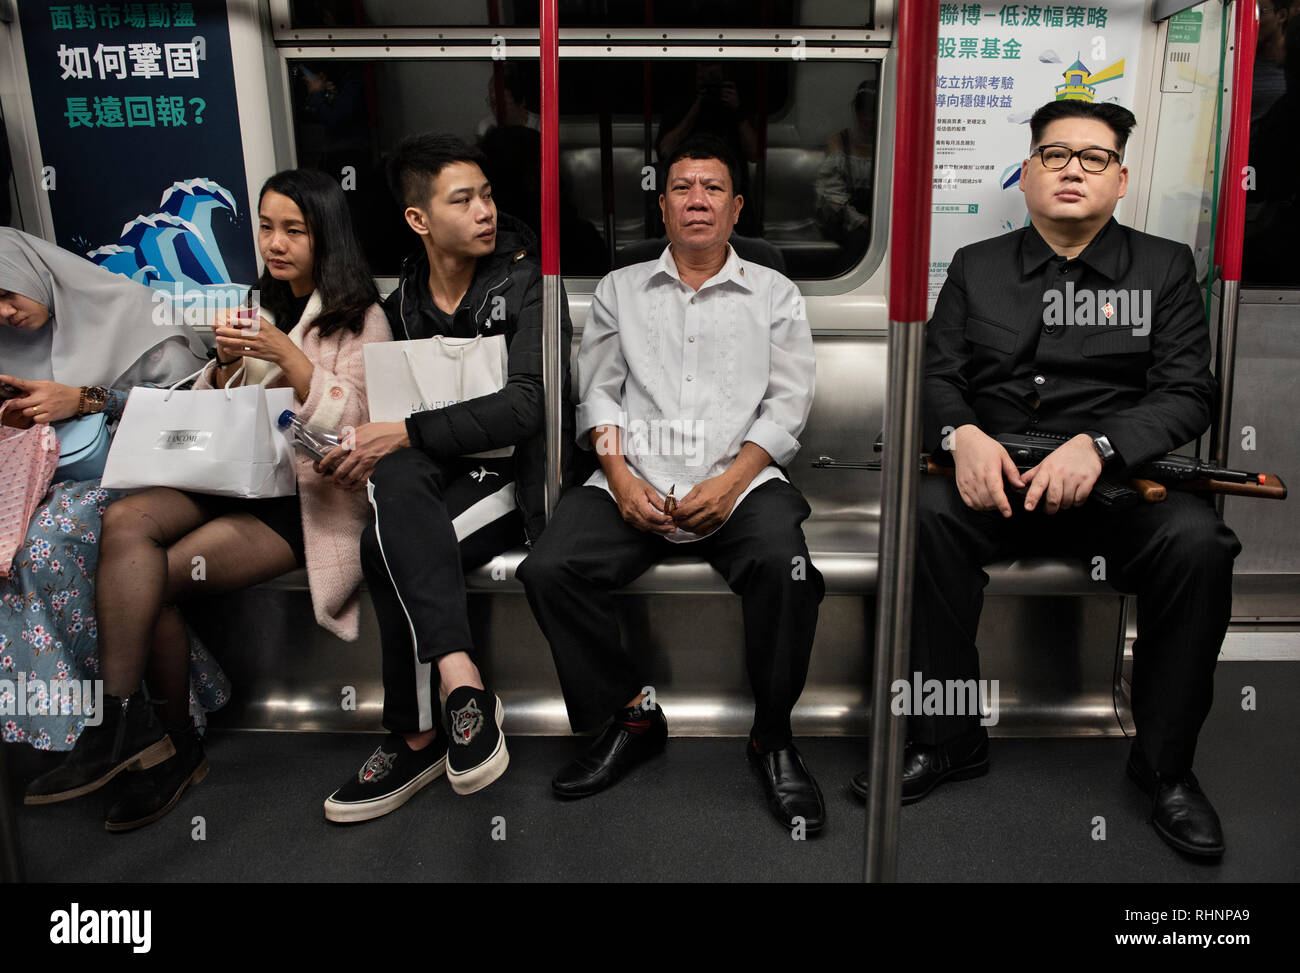 Rodrigo Duterte and Kim Jong-un impersonators seen in the subway to the surprise of commuters in Hong Kong. The impersonators of Filipino president Rodrigo Duterte who goes by the name Cresencio Extreme and North Korean Leader Kim Jong-un who goes by the name Howard X appear in the city of Hong Kong together to meet with the locals and the Filipino migrant workers community. Stock Photo